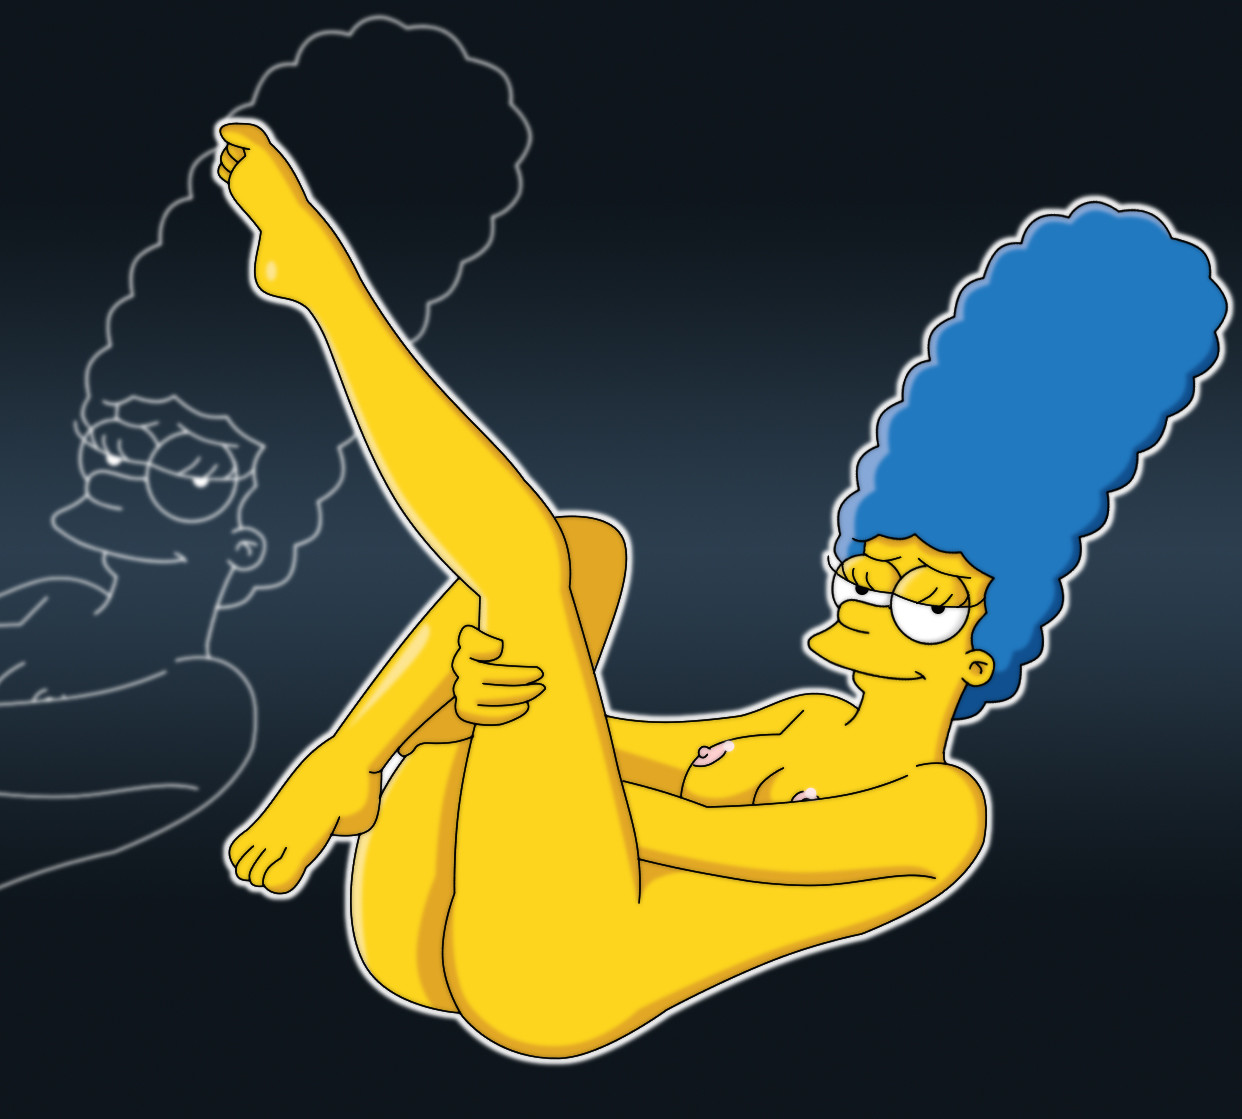 Hot BDSM night in simpsons family